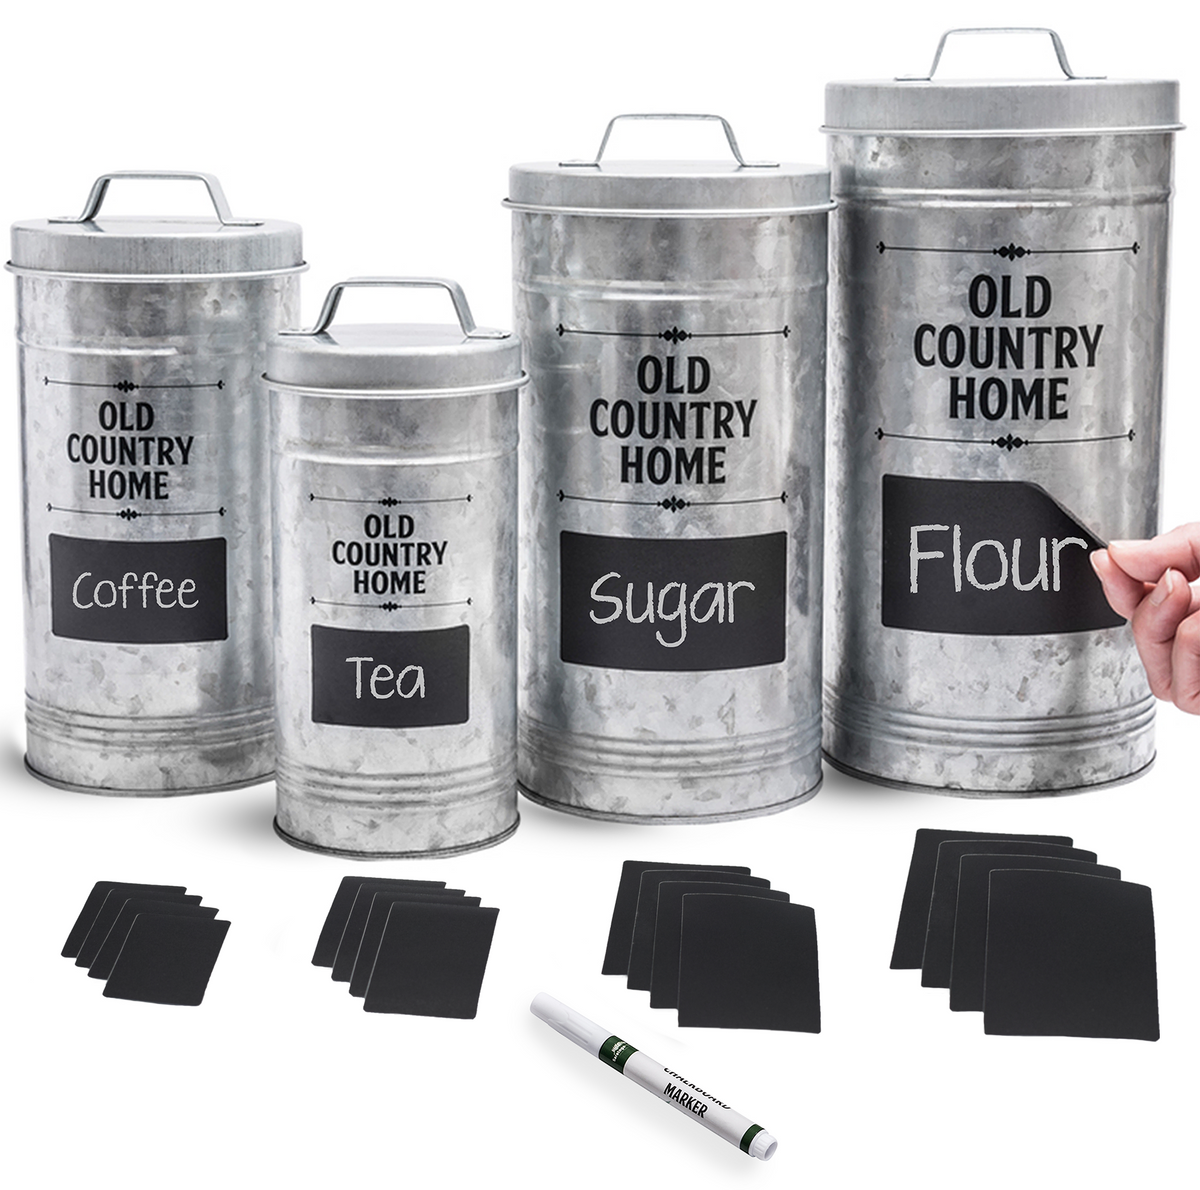 Galvanized Nesting Canisters set by Saratoga Home with 16 labels and chalkboard marker